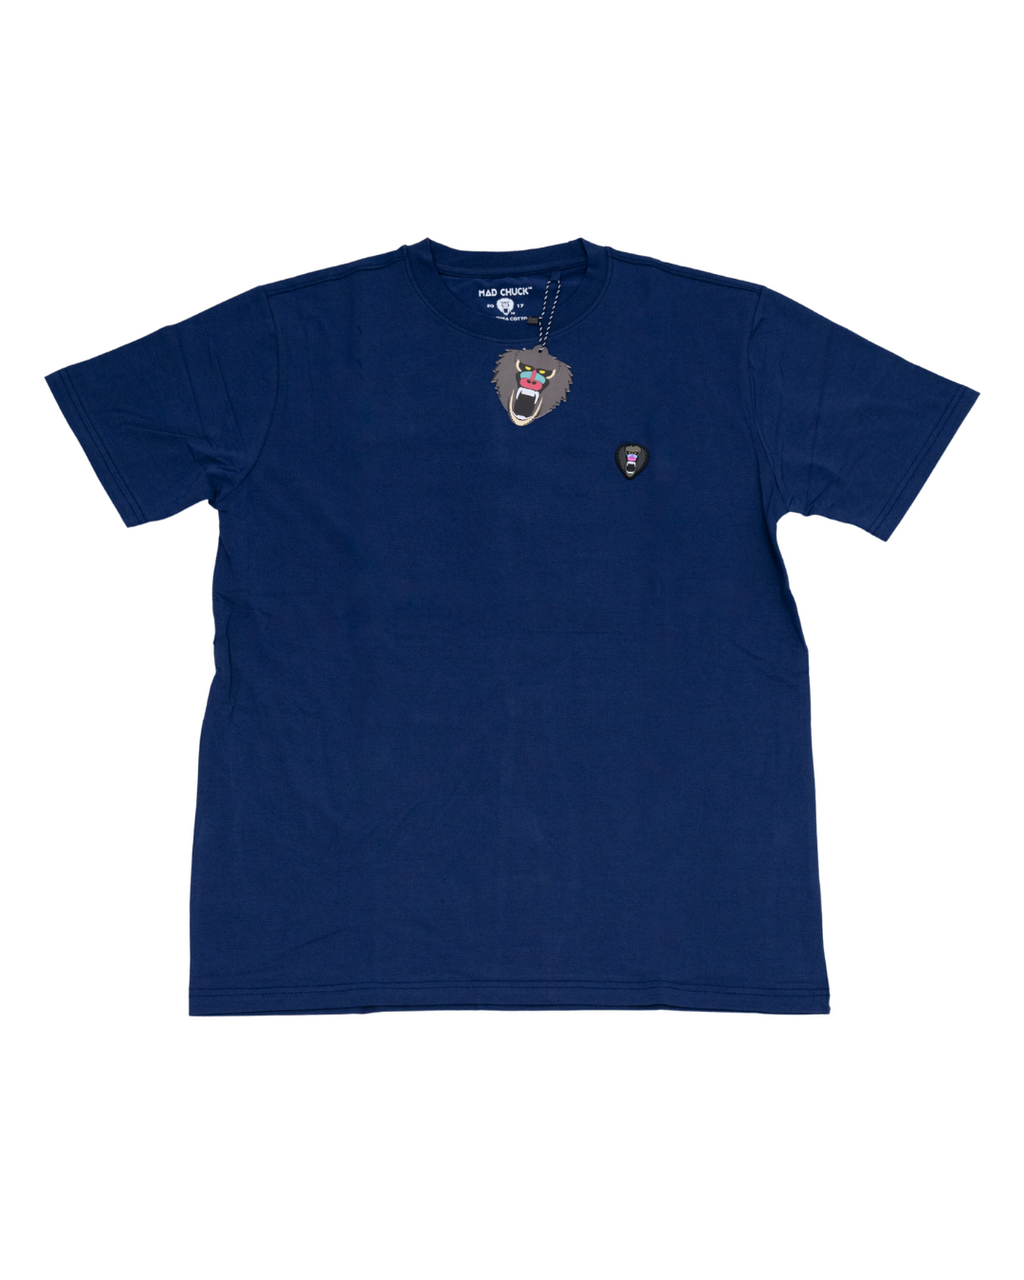 NAVY CREW NECK T SHIRT NEW RUBBER PATCH